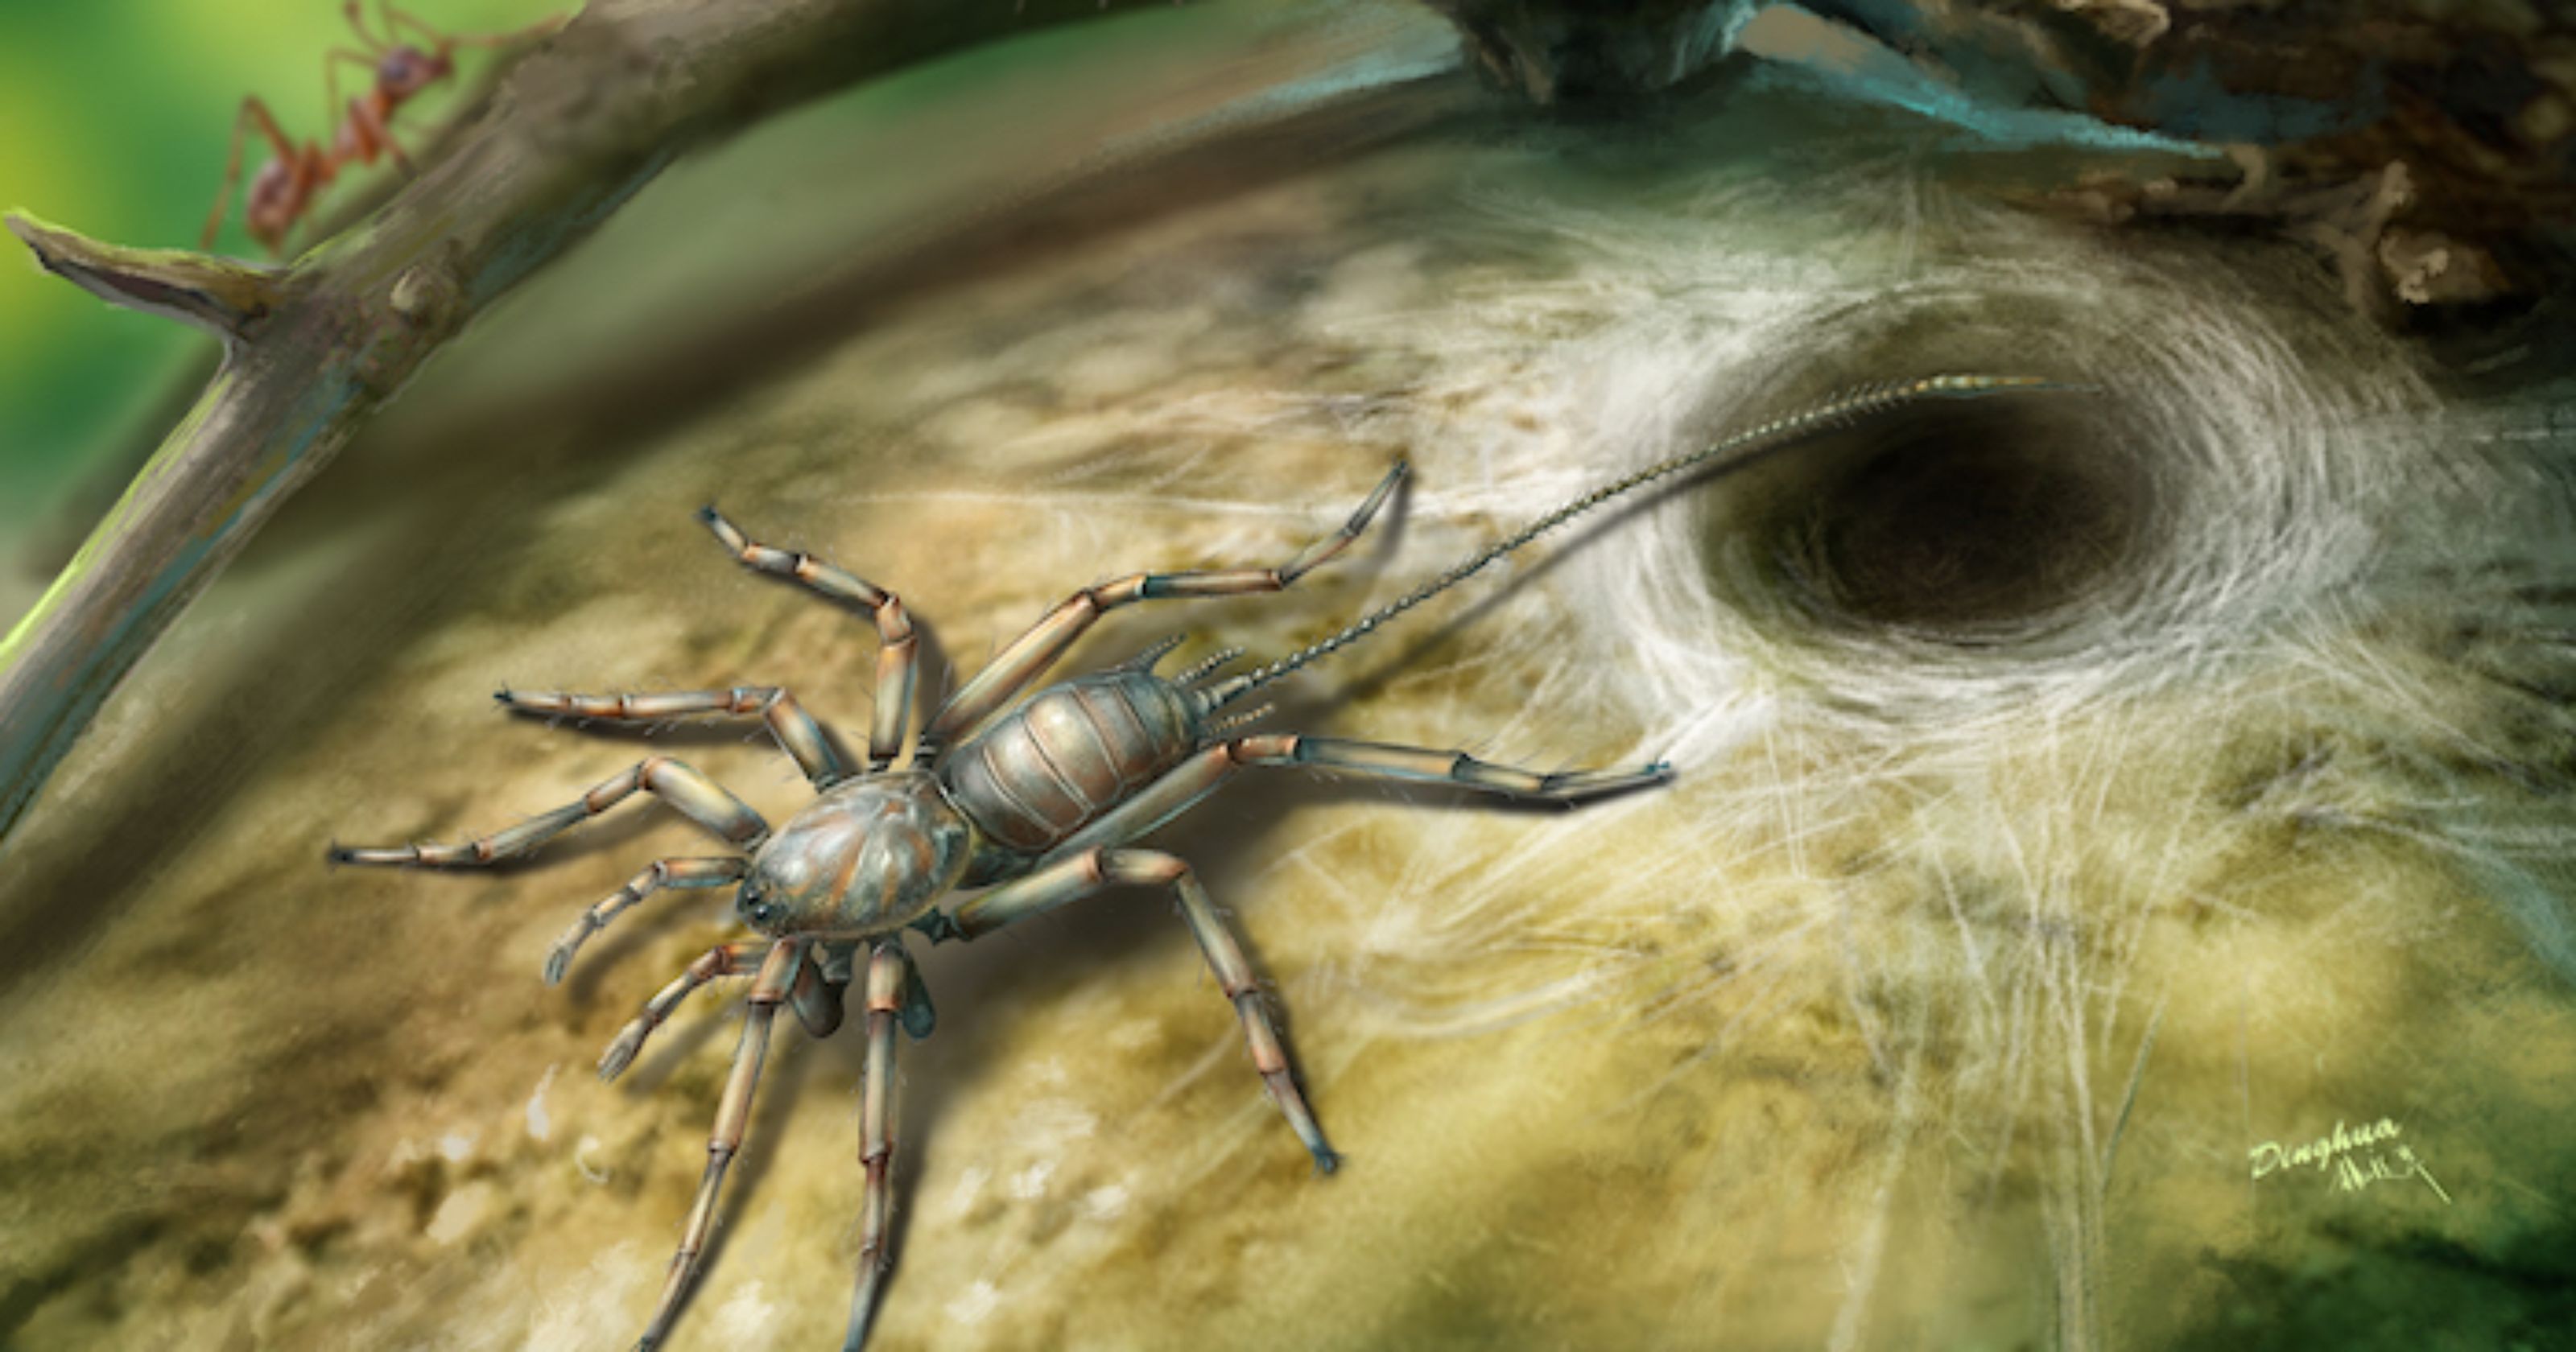 Ancient arachnid: 100-million-year-old spider found trapped in amber